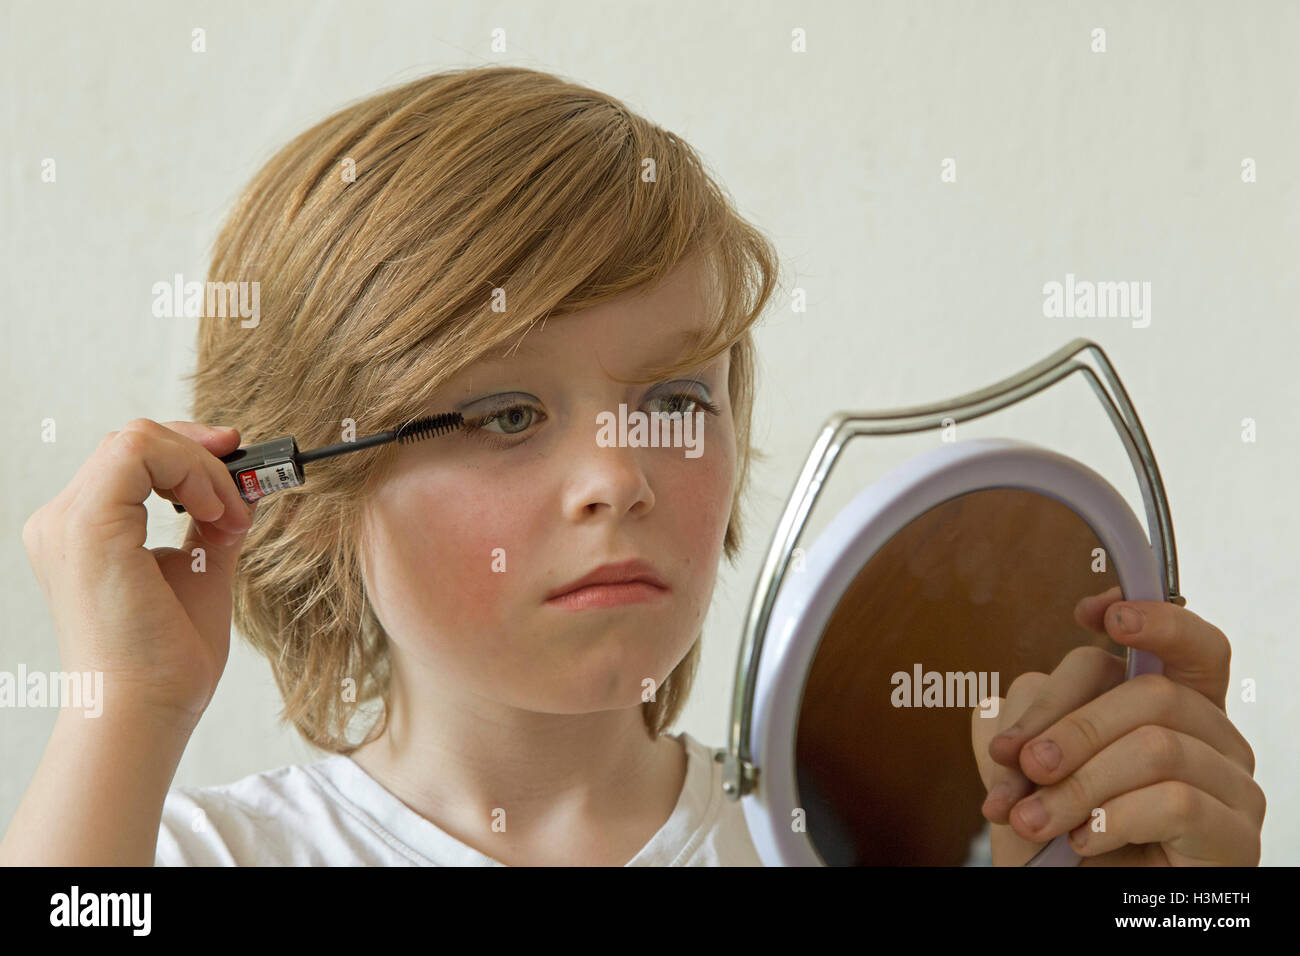 young boy putting makeup on pretending to be a girl Stock Photo - Alamy